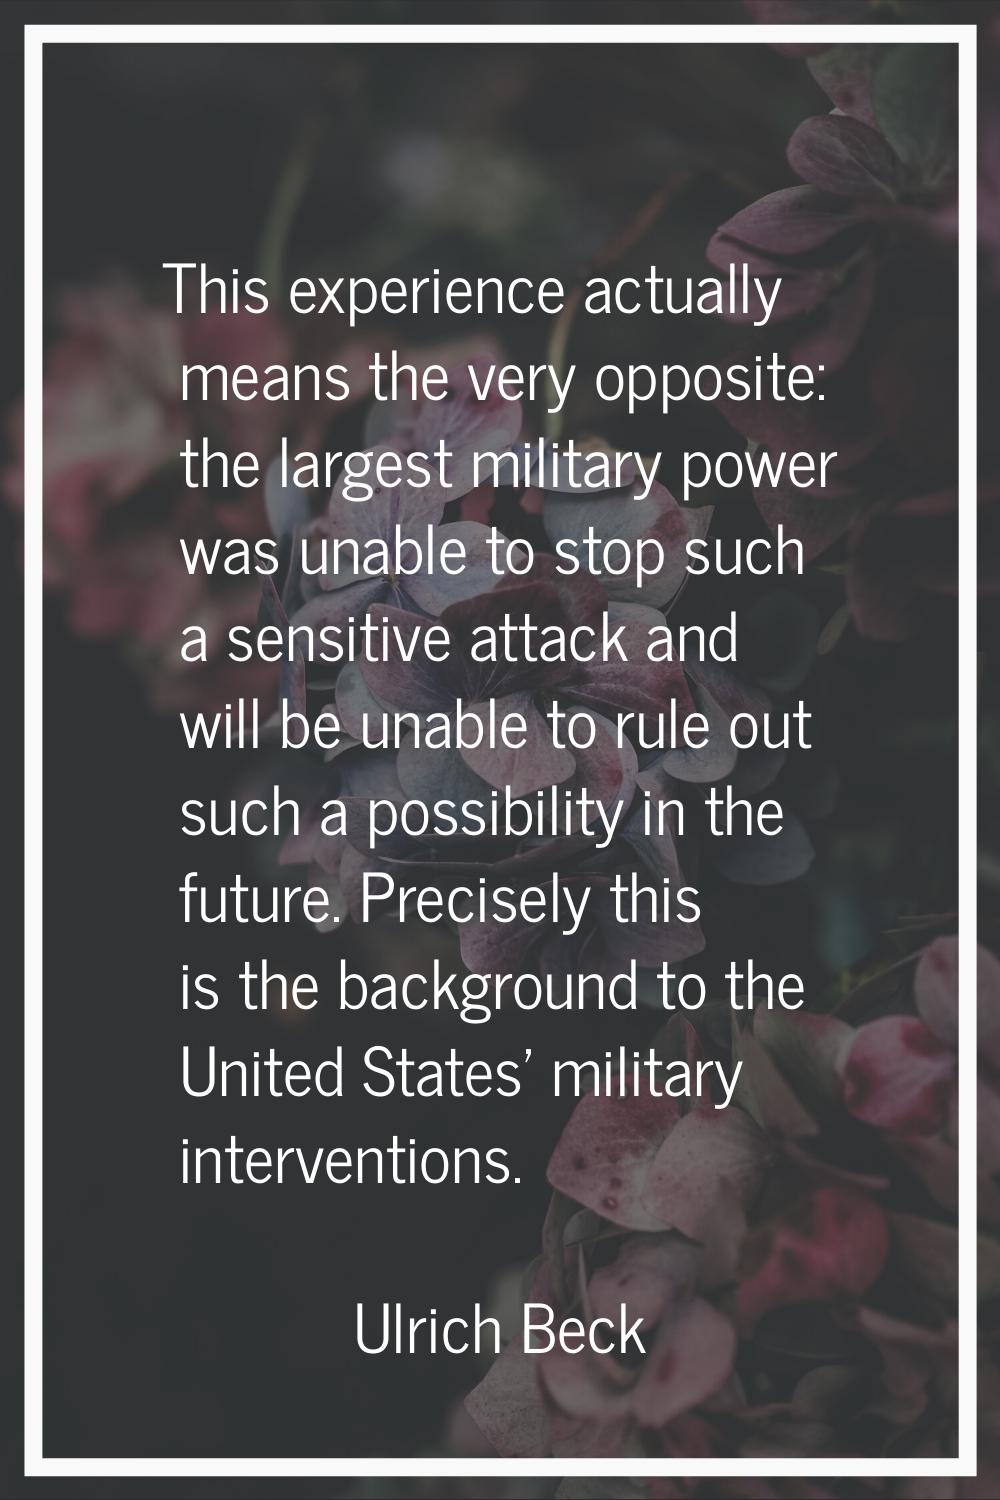 This experience actually means the very opposite: the largest military power was unable to stop suc